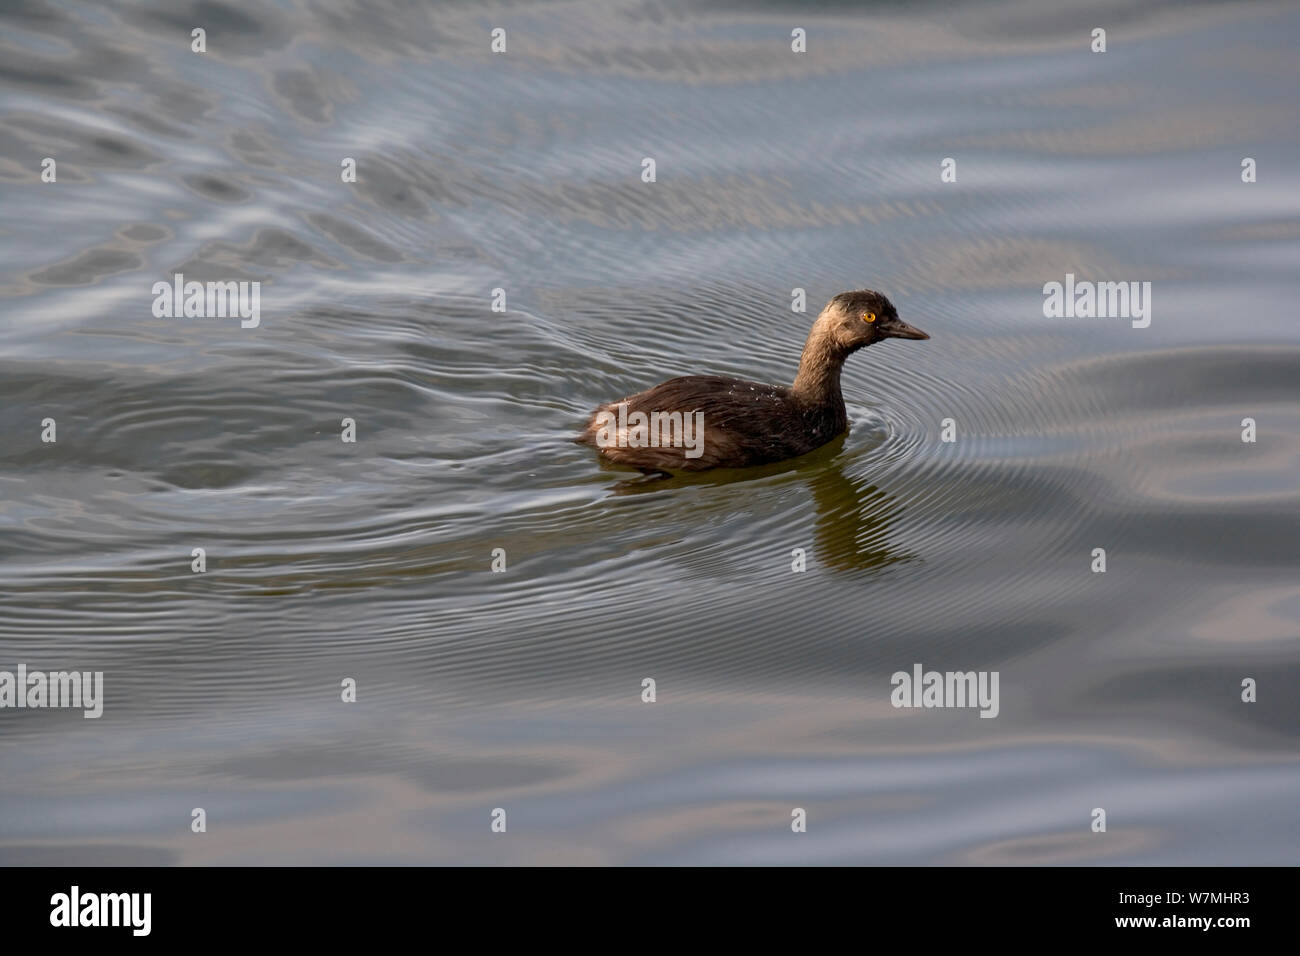 Eared / Black-necked Grebe (Podiceps nigricollis) on water. Catemaco lagoon, eastern Mexico, August. Stock Photo